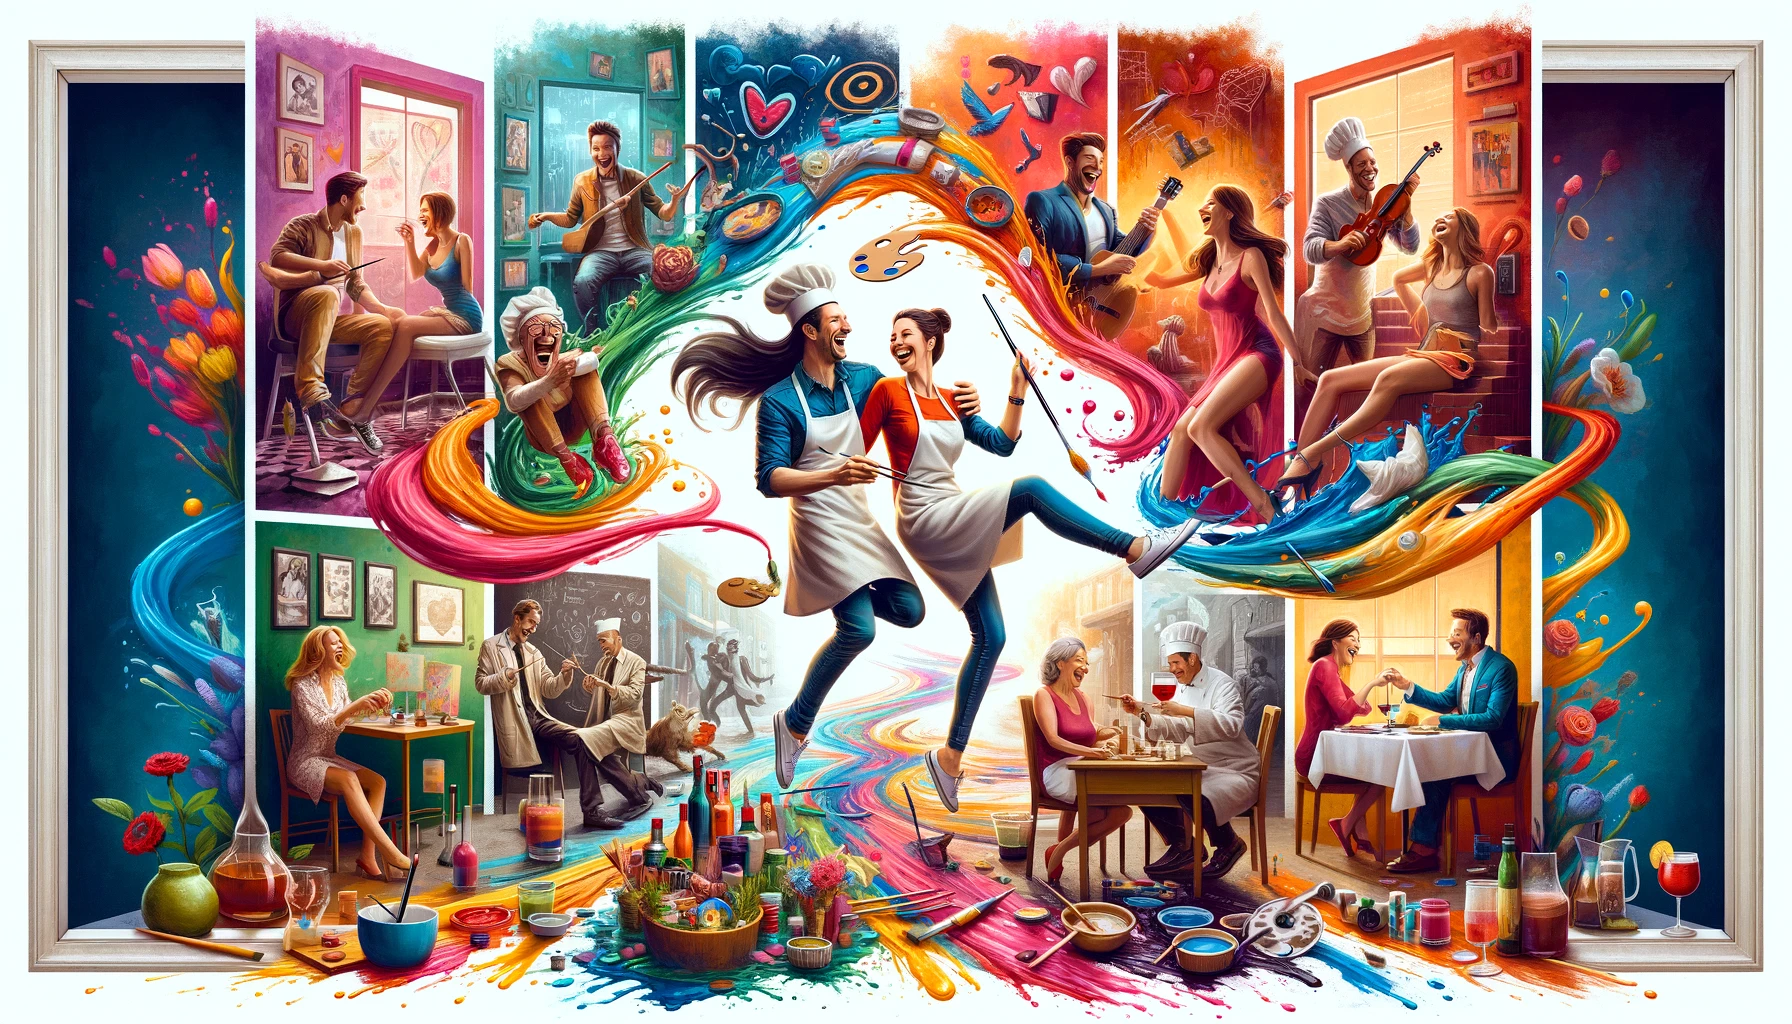 ten creative date night ideas, an imaginative and colorful collage that showcases a spectrum of artistic and creative date night experiences. At the heart of the image, a joyful couple is depicted engaging in various activities, each framed by its own vibrant vignette. One scene shows them with aprons on, laughing together as they splash paint on a shared canvas, symbolizing a fun painting class. Another vignette captures them in a close embrace, moving gracefully to music in a dance lesson, surrounded by soft lighting that enhances the romantic atmosphere. A third scene illustrates them wearing chef hats, playfully cooking together in a kitchen setup, indicating a cooking lesson. To add a touch of mystery and intrigue, another part of the image portrays the couple dressed in costume, examining clues with magnifying glasses at a murder mystery evening. Lastly, a snippet of them sitting side by side, clutching their sides in laughter at a comedy night, rounds out the montage.